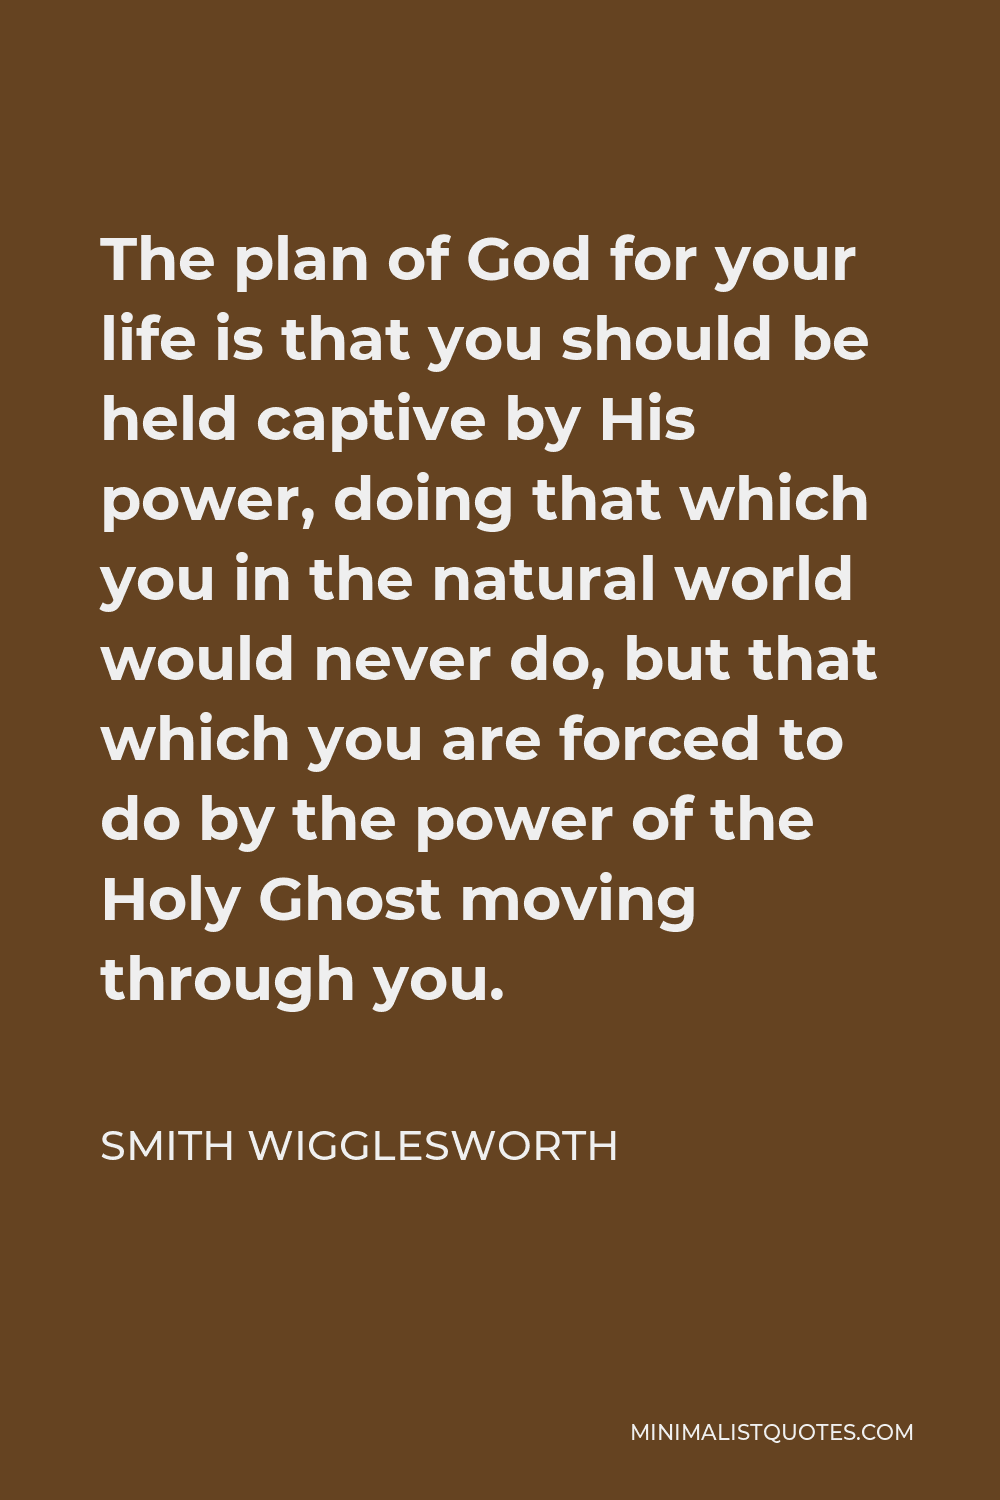 Smith Wigglesworth Quote - The plan of God for your life is that you should be held captive by His power, doing that which you in the natural world would never do, but that which you are forced to do by the power of the Holy Ghost moving through you.